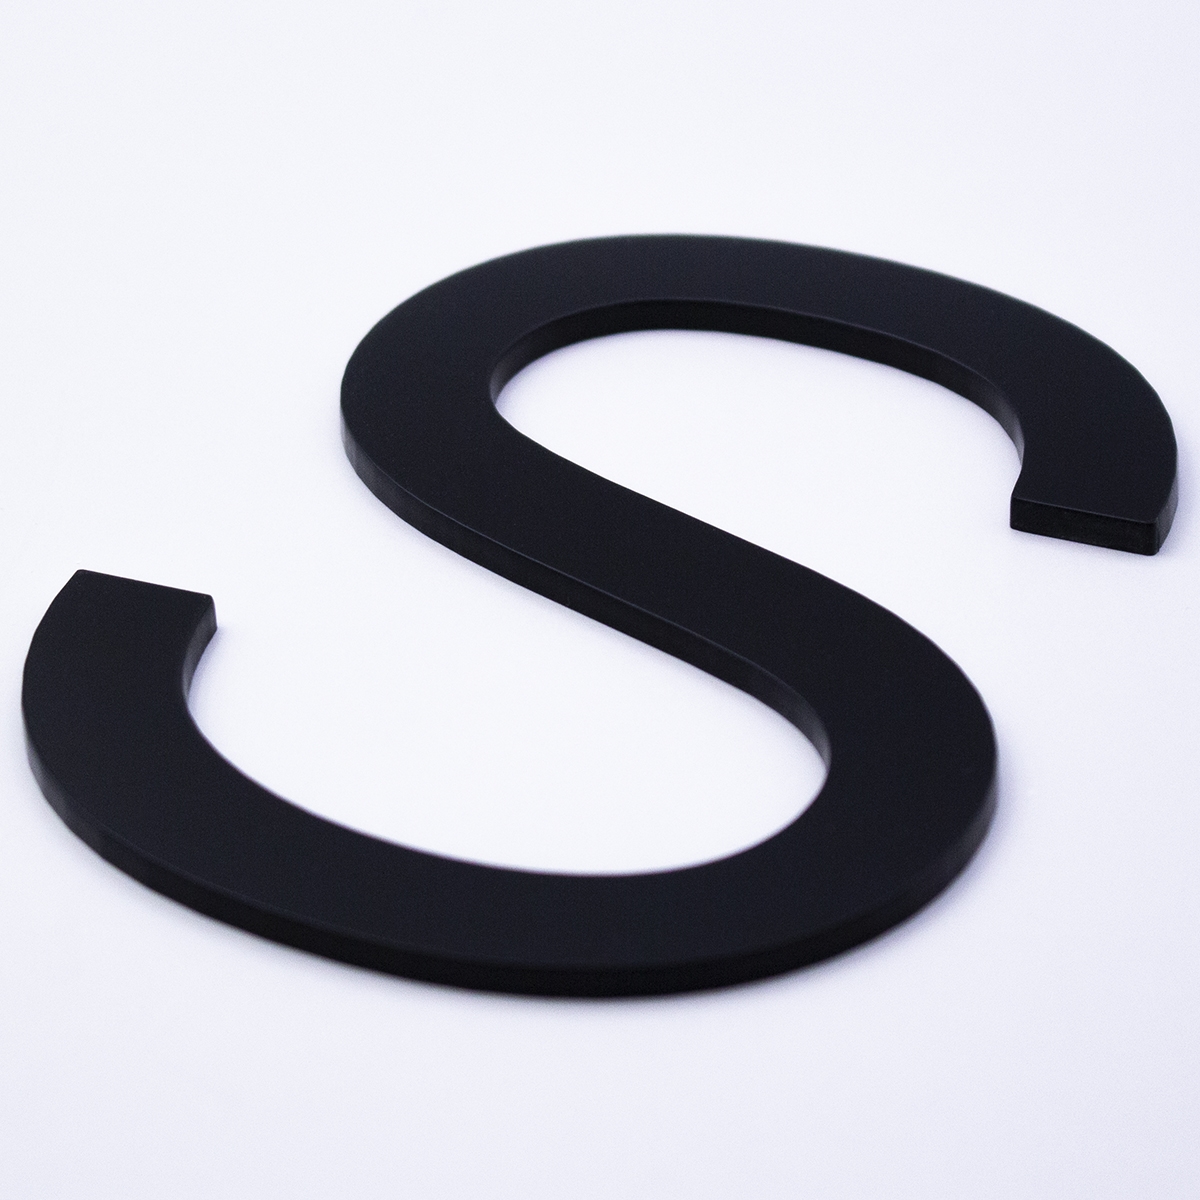 Black Acrylic Laser Cut Letters - 1/4 (6mm) thick